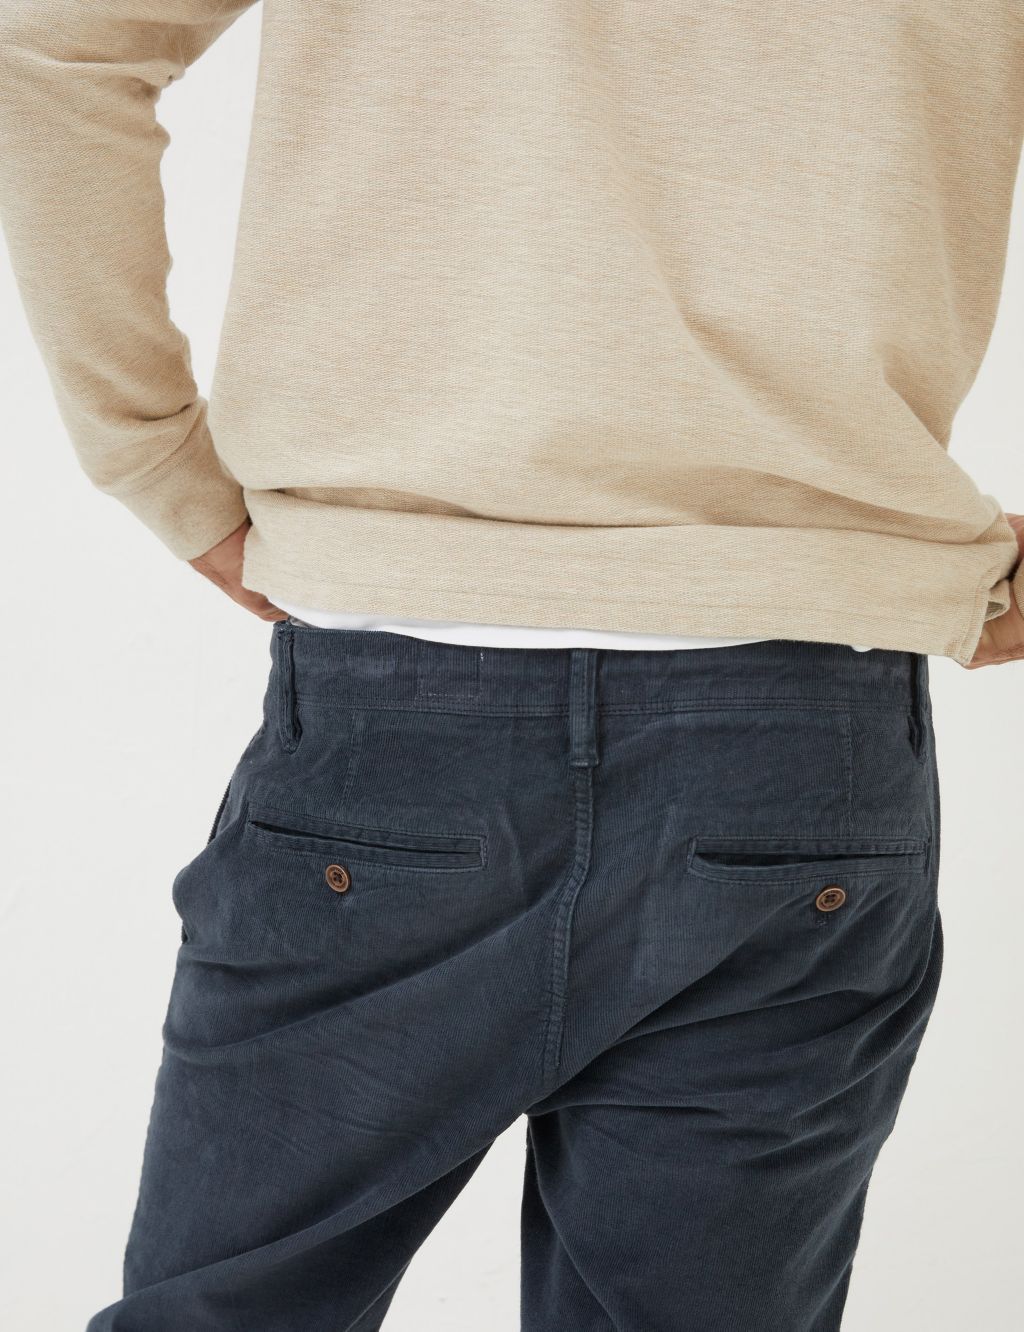 Straight Fit Corduroy Trousers image 4